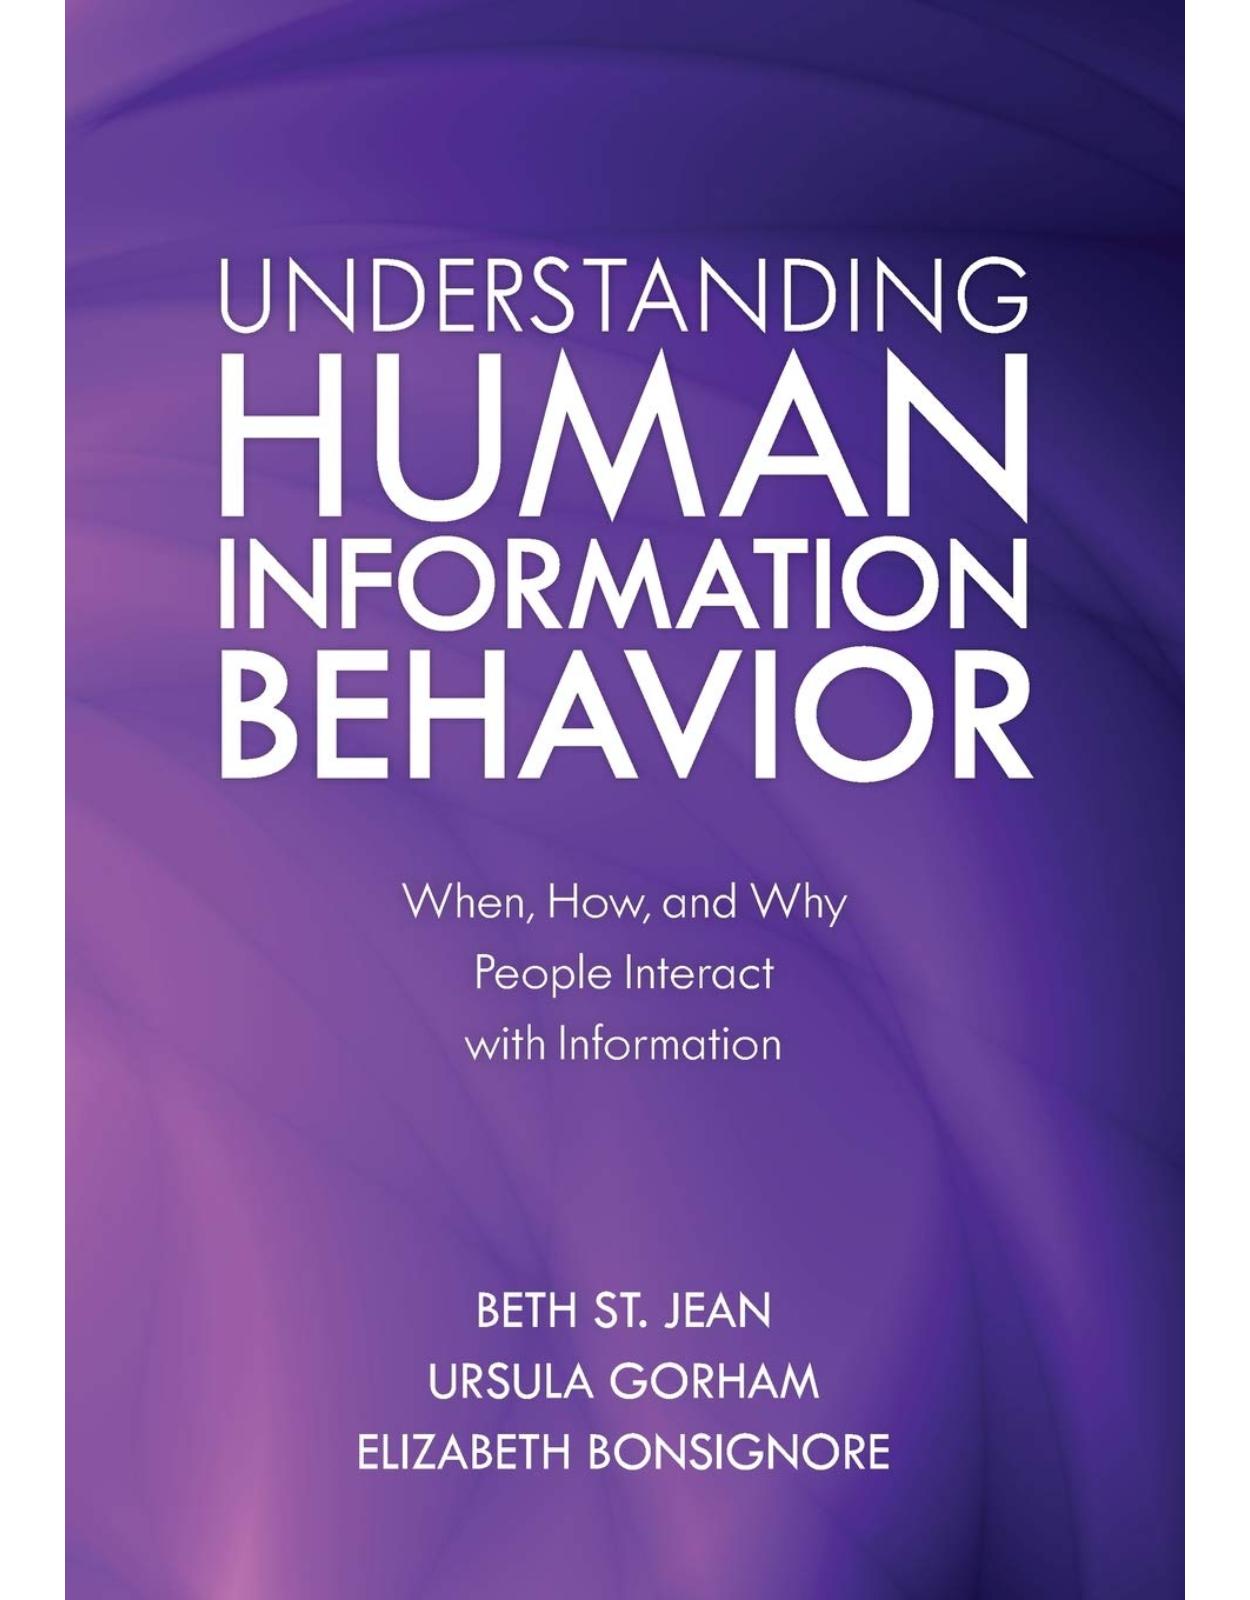 Understanding Human Information Behavior: When, How, and Why People Interact with Information